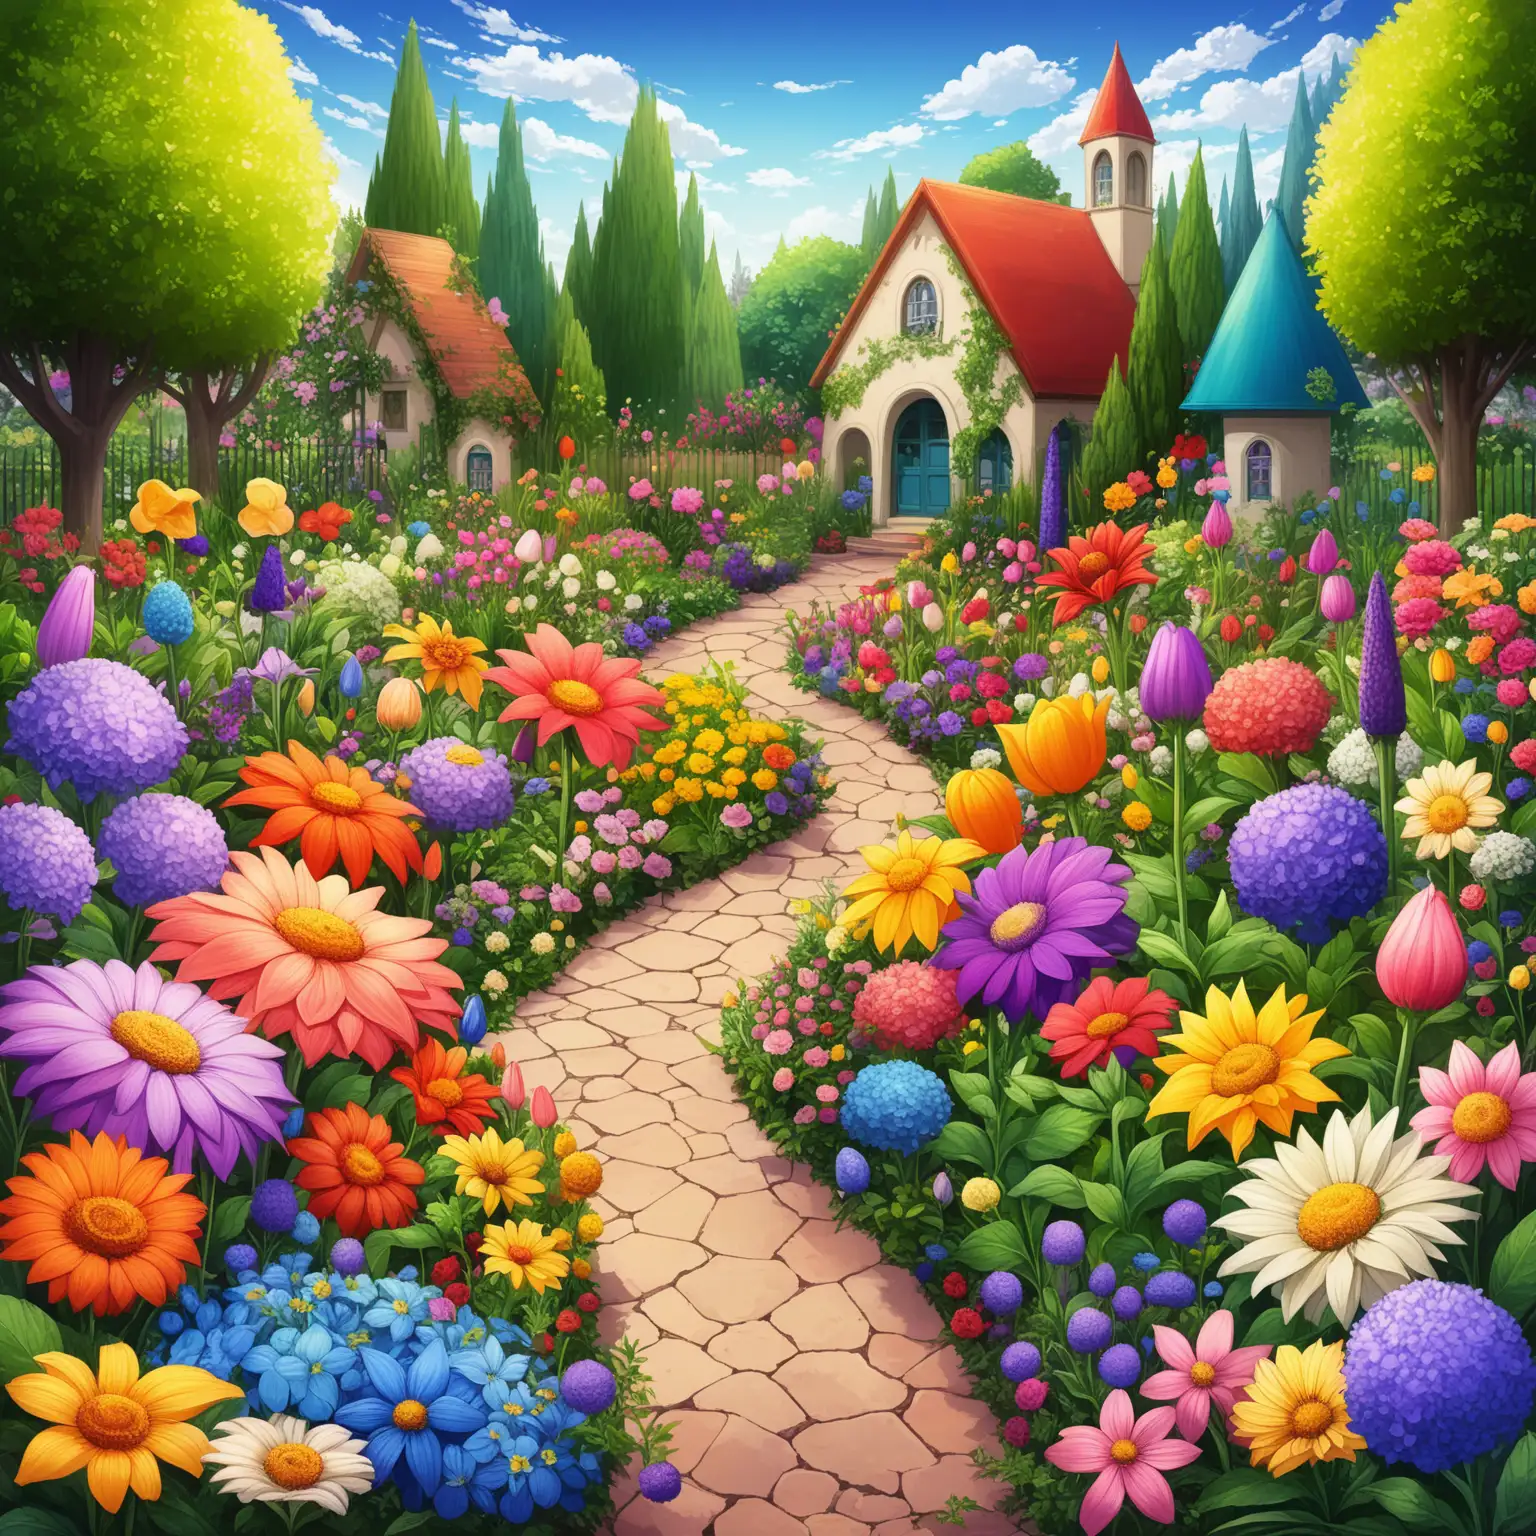 A colorful garden with various flowers of different shapes and sizes, each representing uniqueness.